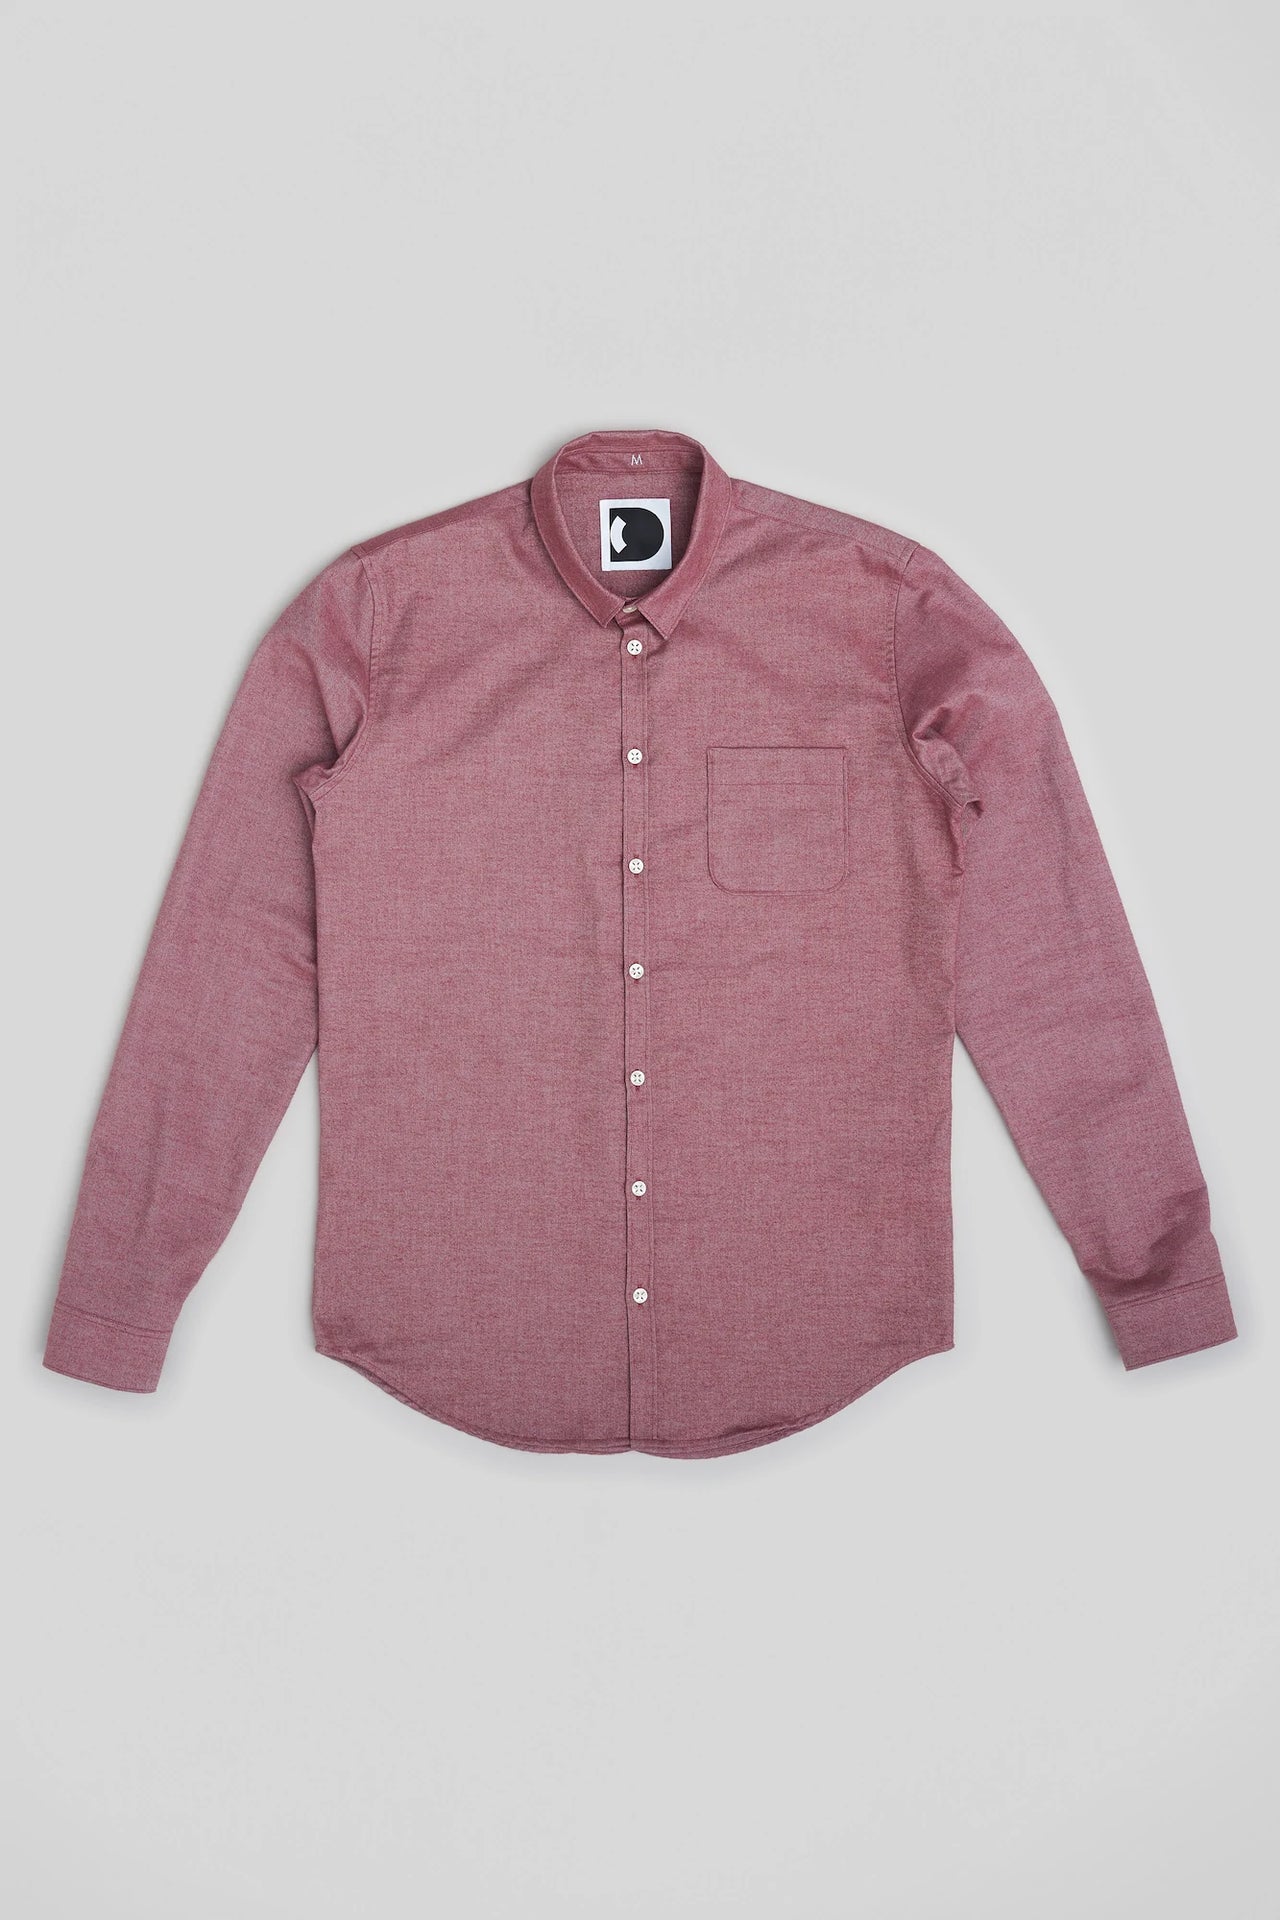 Proper Shirt in Wine Red Brushed Soft Cotton Portuguese Flannel